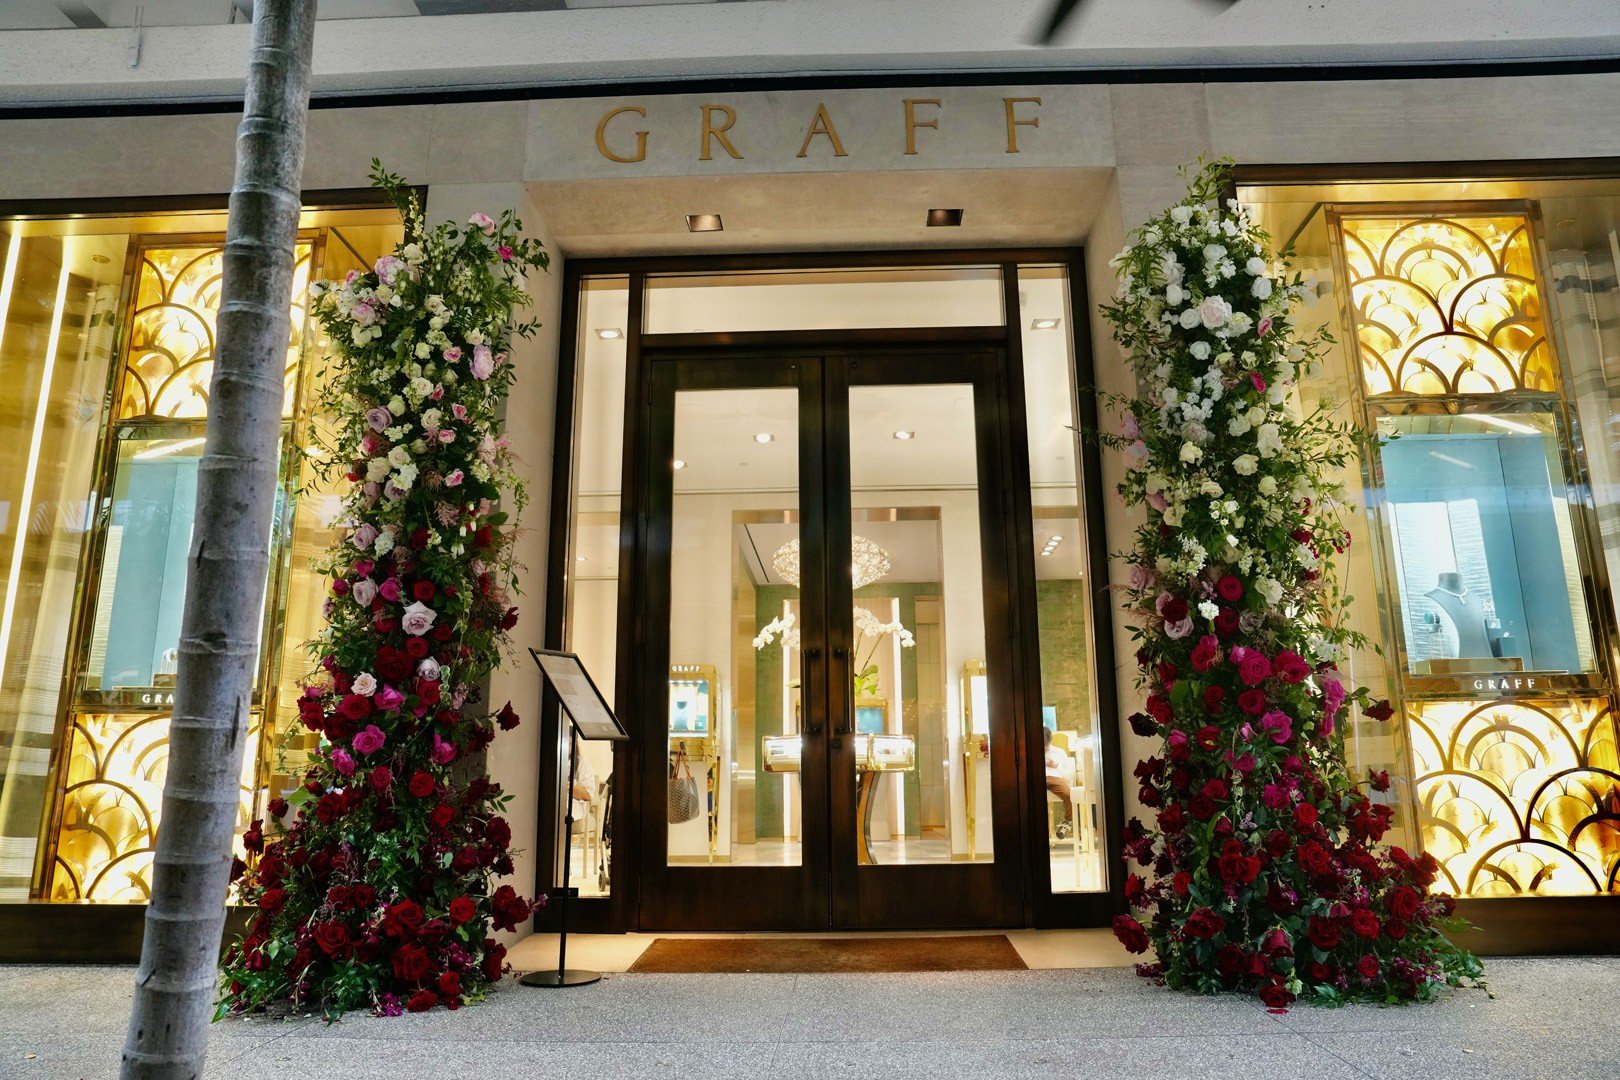 London inspired doorway presented by Graff and created by Blooms Social